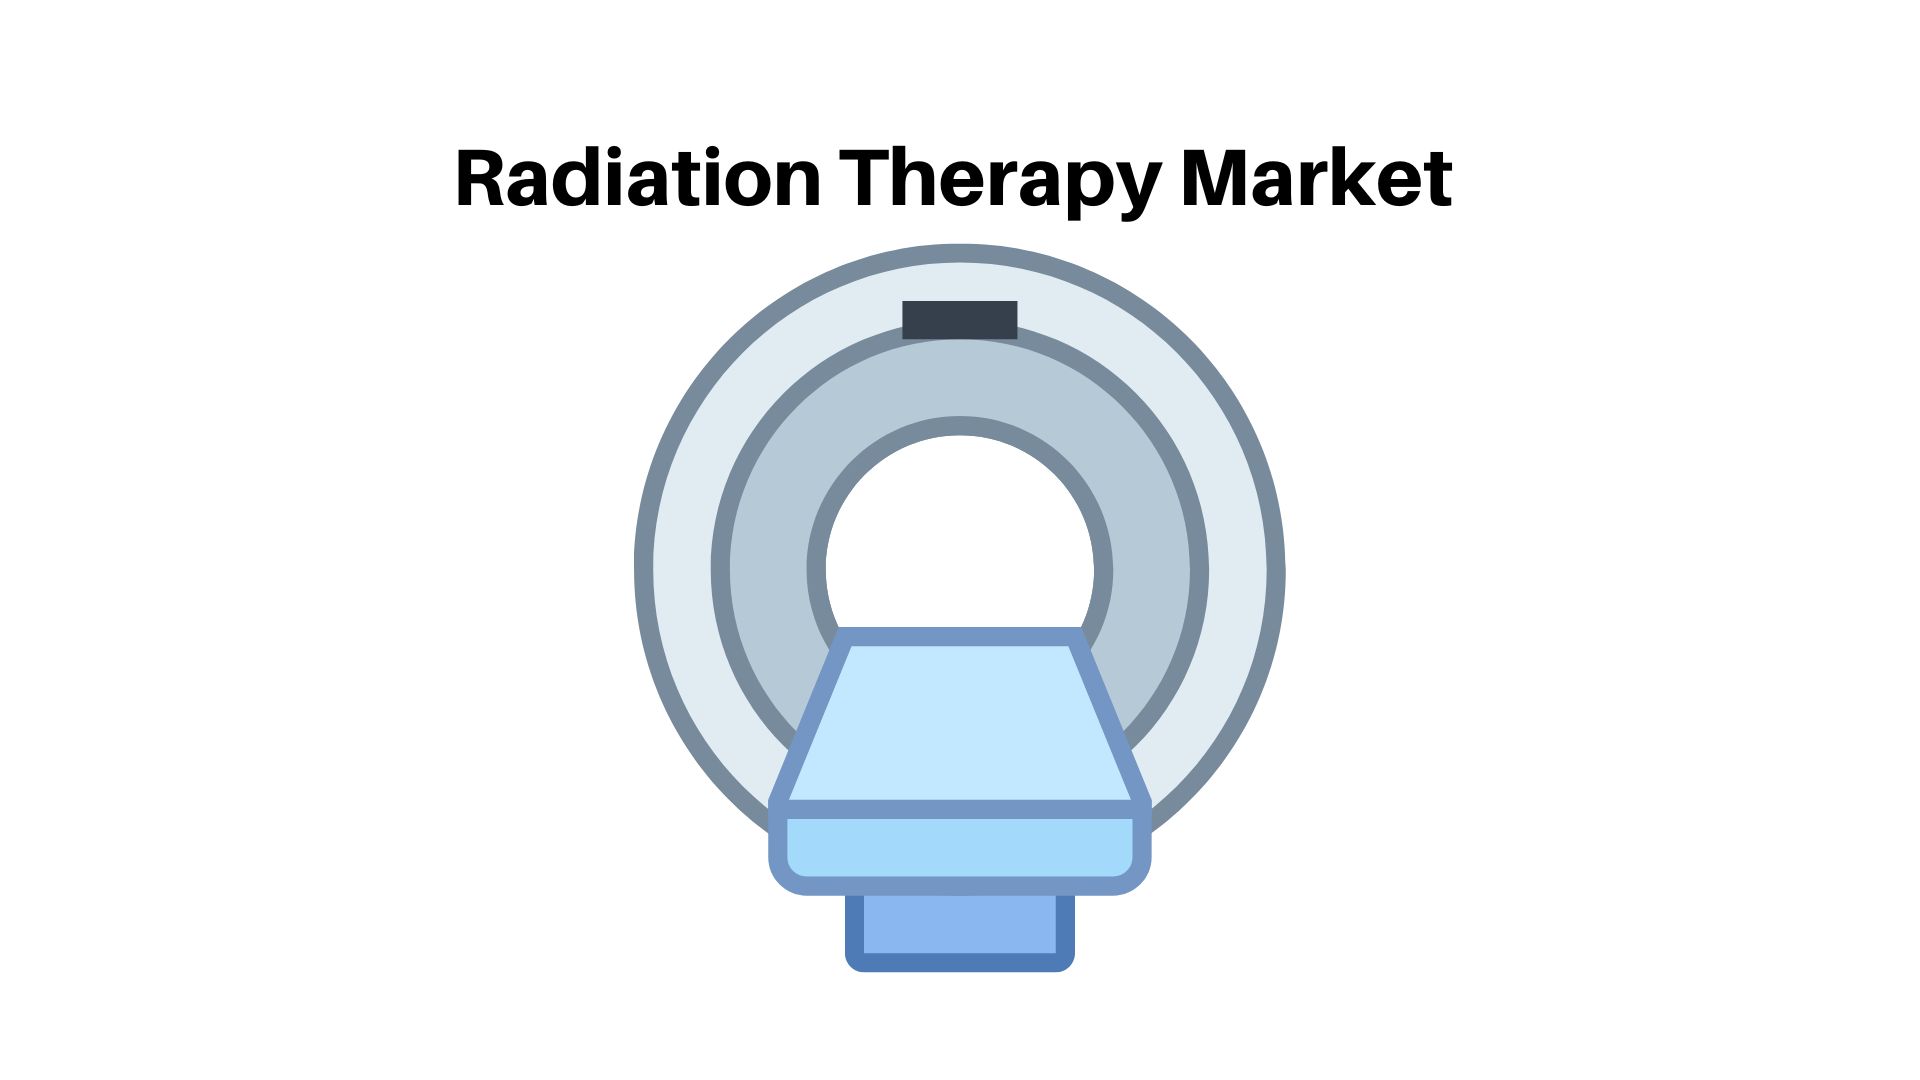 Radiation Therapy Market size is predicted to grow at a CAGR 📈 of 5.1%